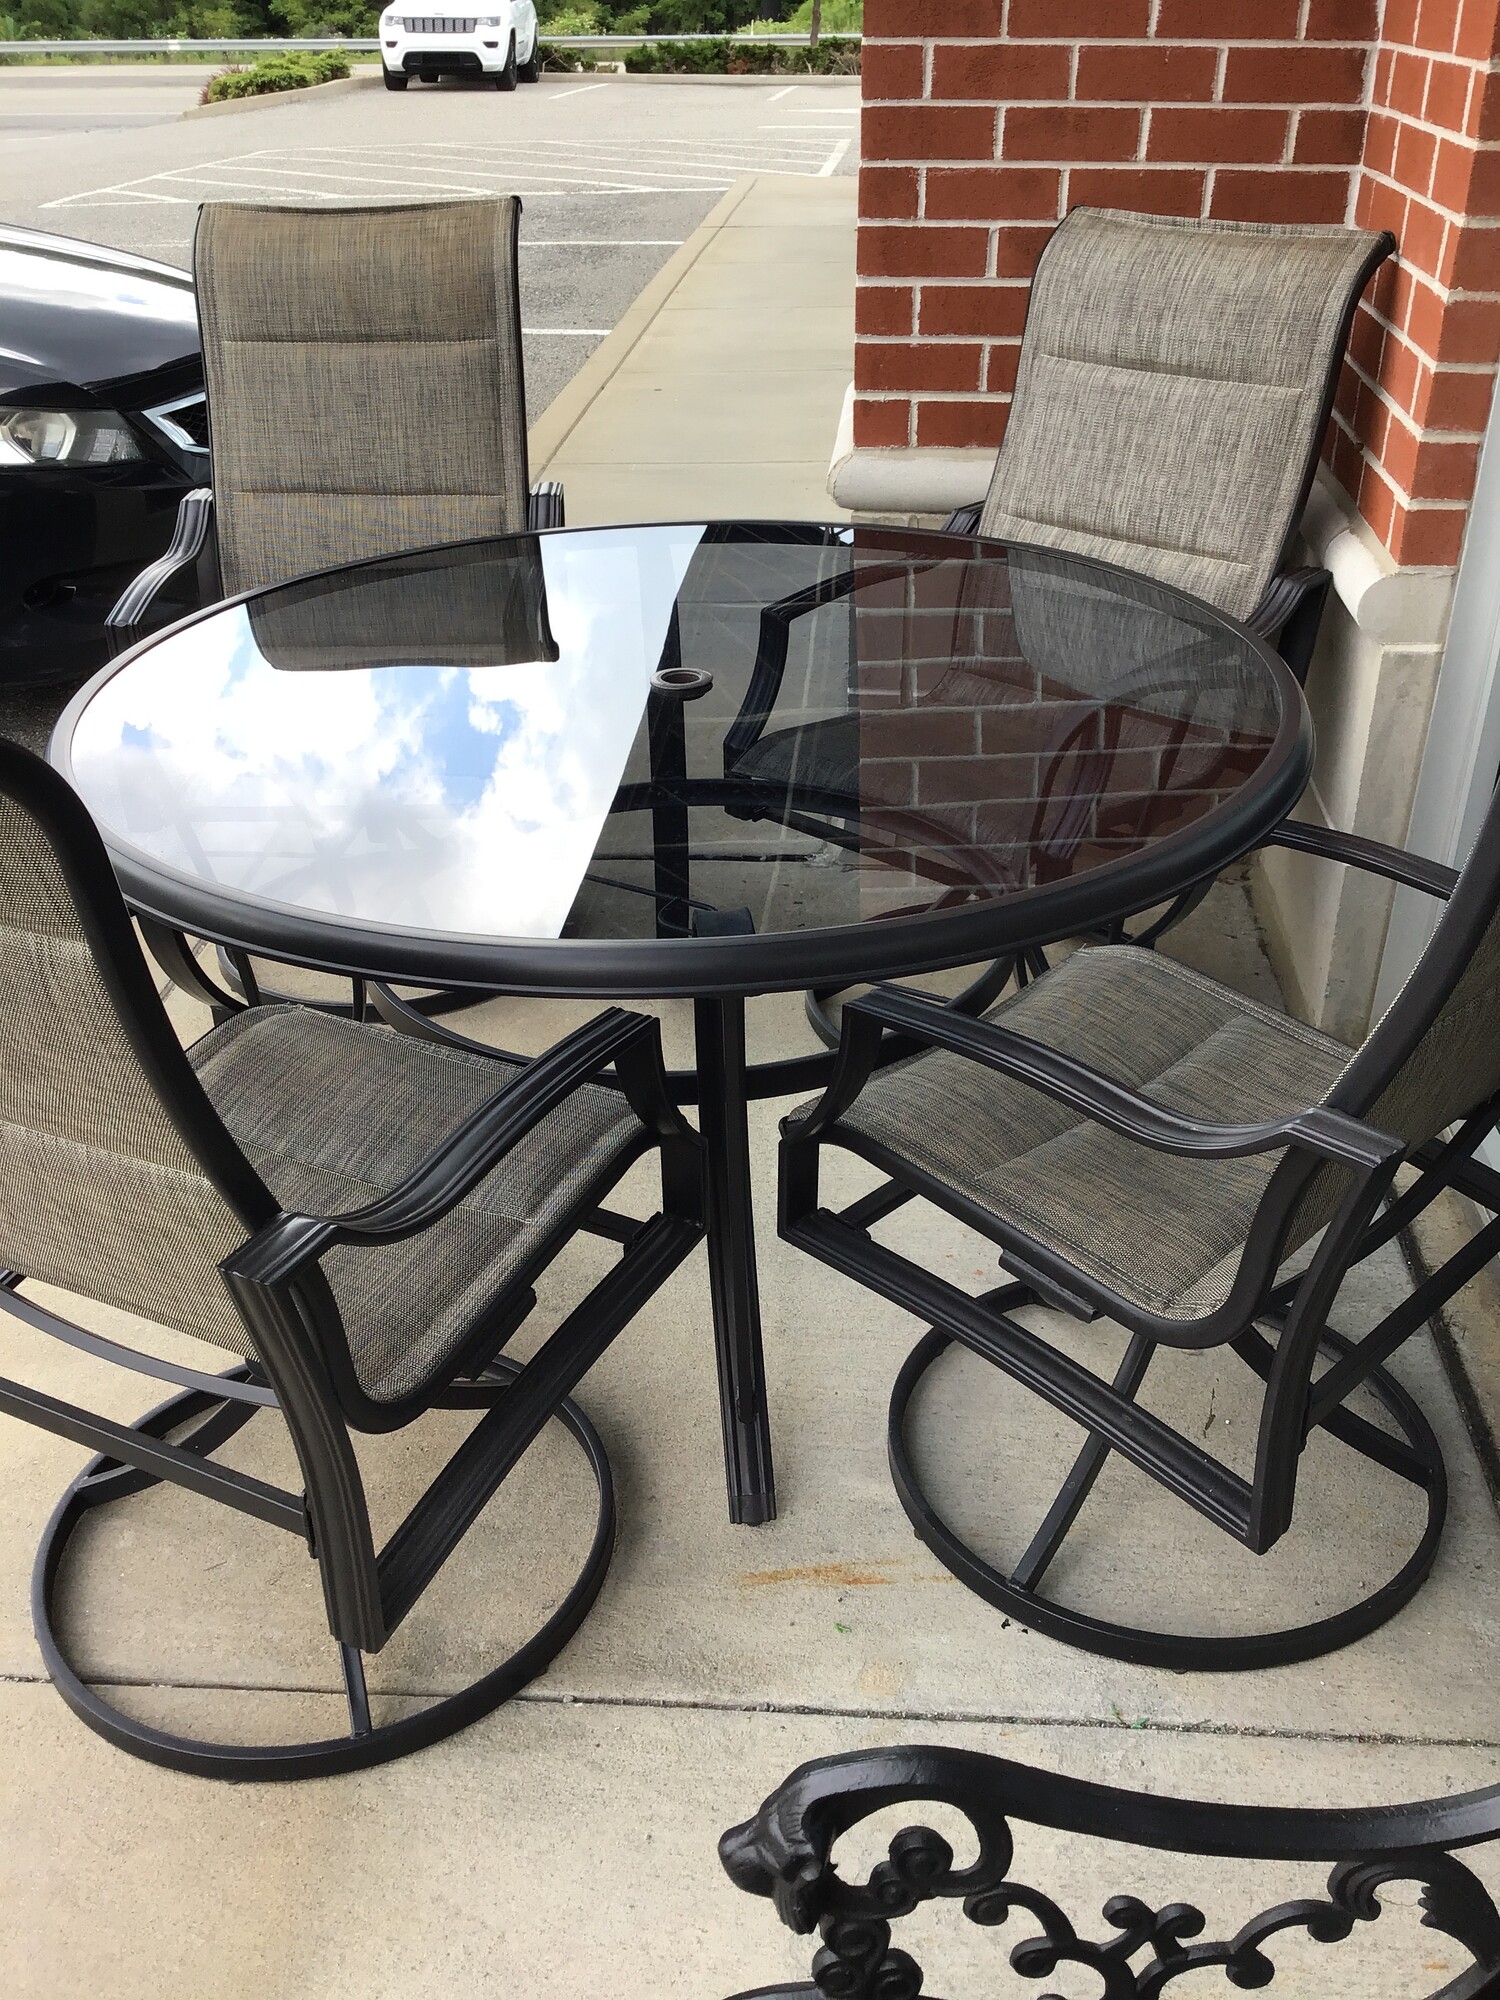 Outdoor Dining Set
Round Glasstop Table
Black frame
4 x Swivel Padded Sling Chairs
Black/Brown Fabric
Table and chairs come with Duck Covers!

Table Dimensions: 53x53x29